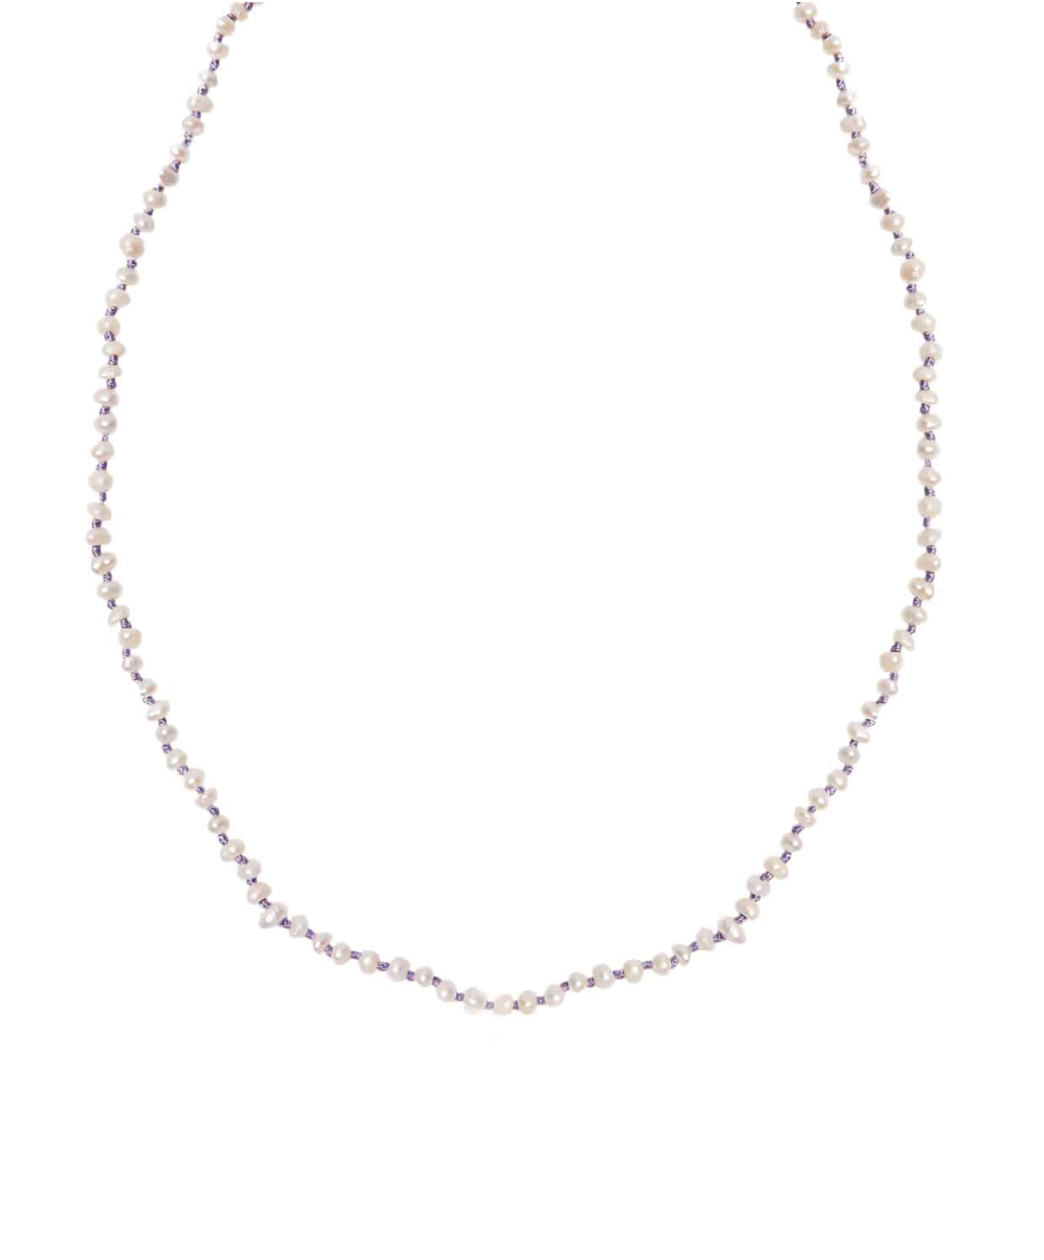 Wizard of Pearls Knotted Necklace - Lilac